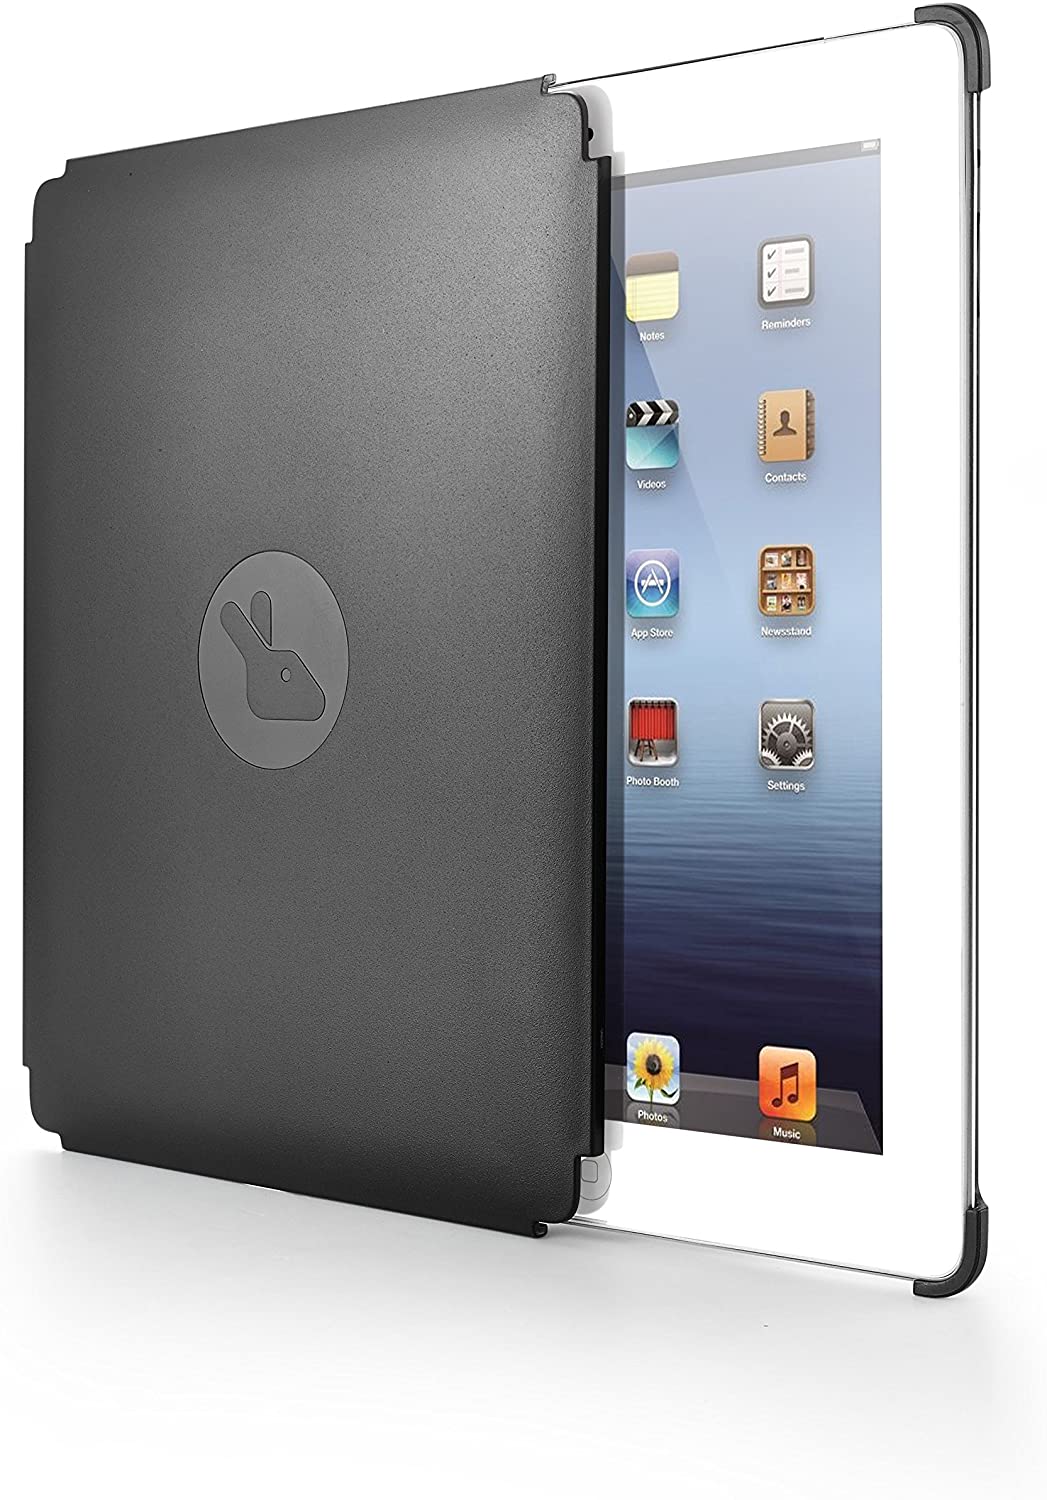 New Trent Grabbit/Gladius iPad Case Compatible: iPad 4, iPad 3 and iPad 2. 360 rotatable, Genuine Leather Hand Strap, Stand/Movie Wall Clip and Matte Finish - e4cents